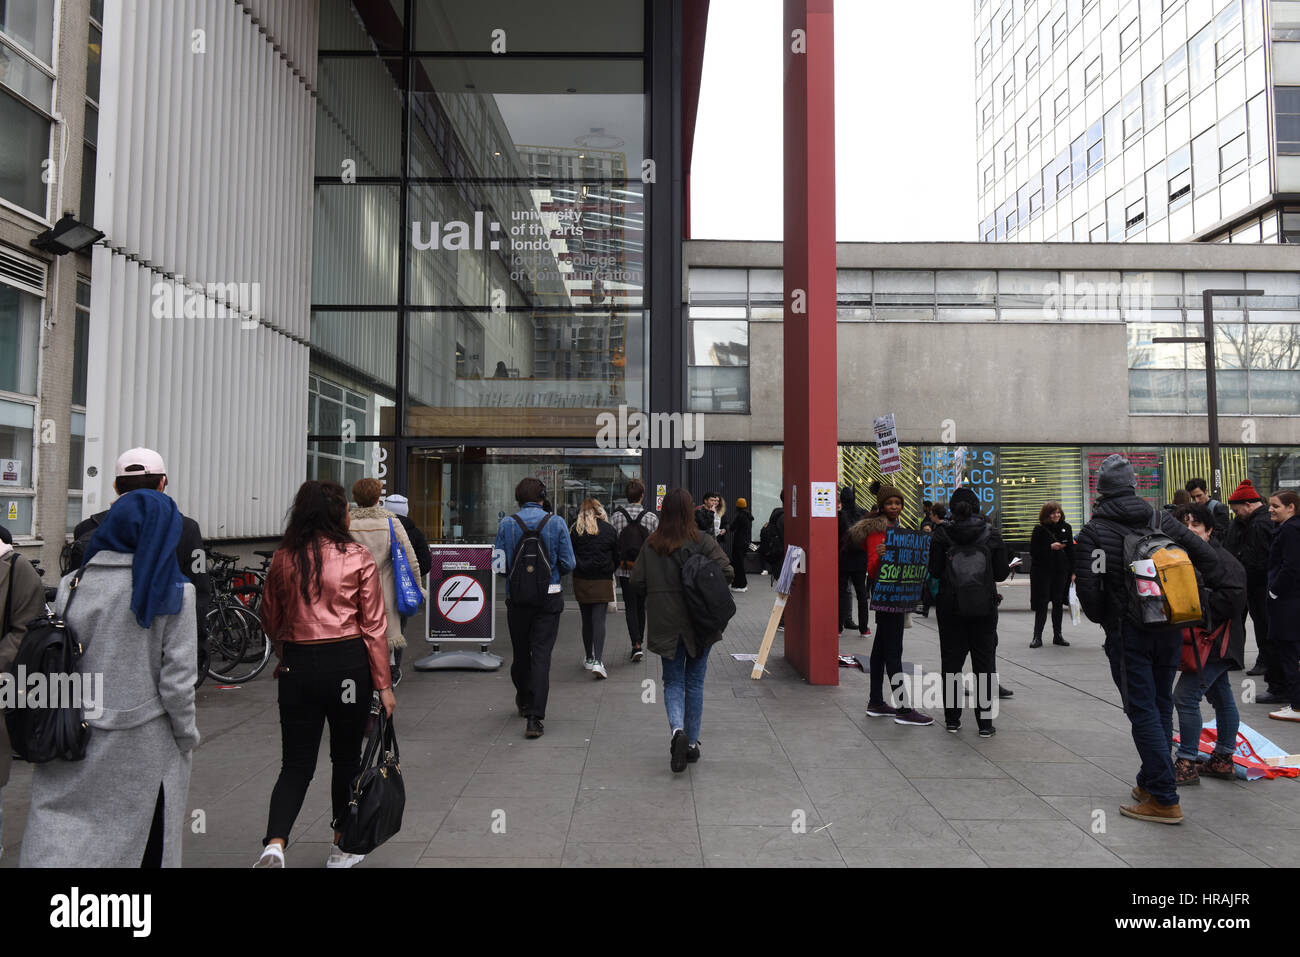 Students entering UAL: University Of The Arts while protesters are gathering outside the university for Stop-Trump & Stop-Brexit protest Stock Photo